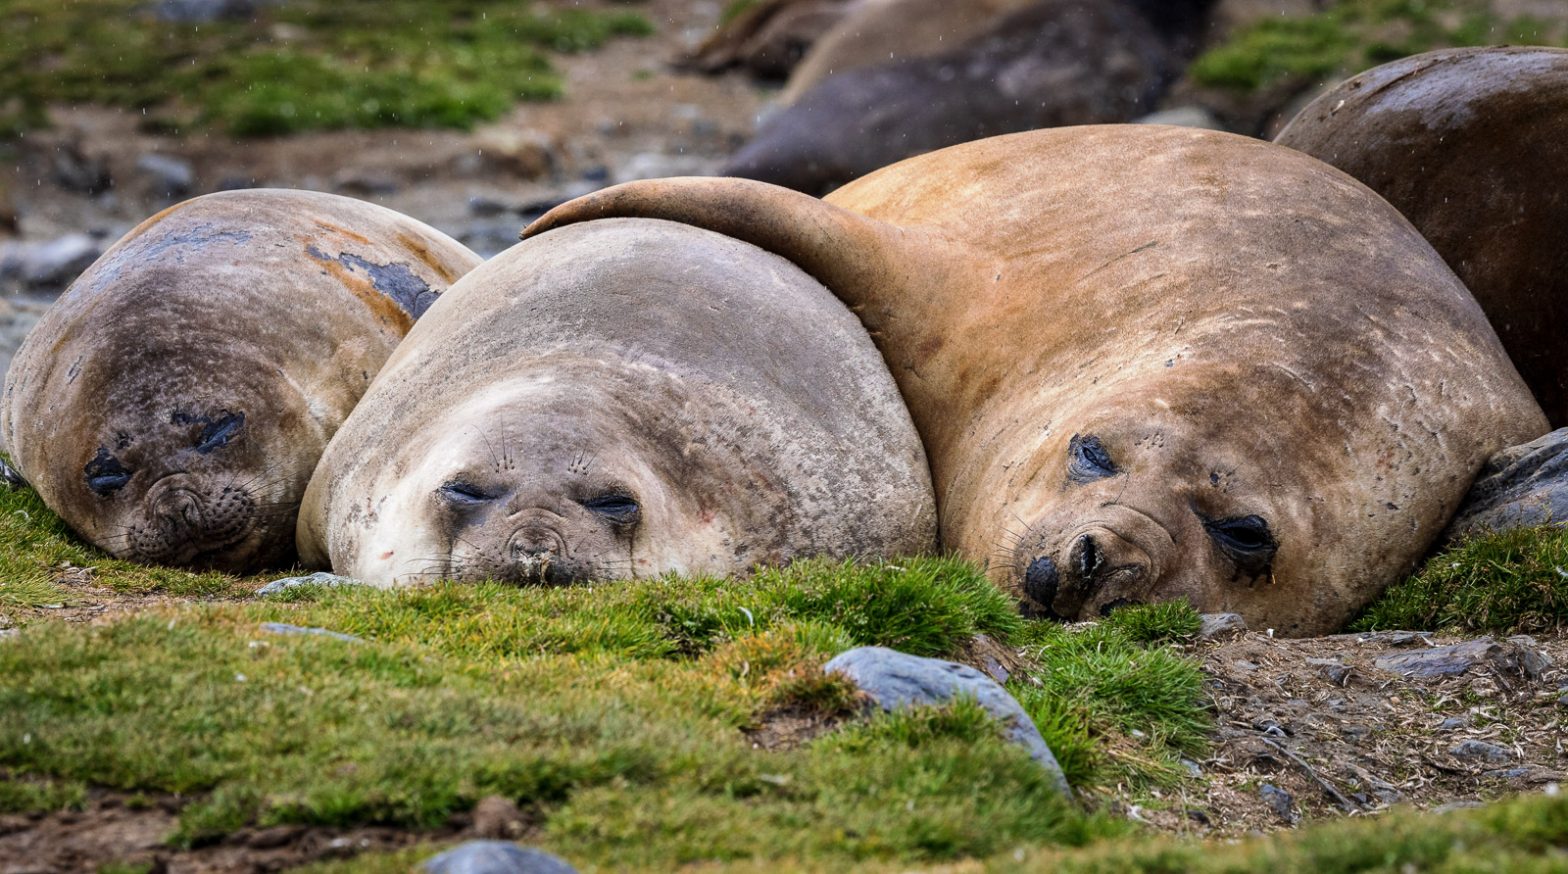 Why are Southern Elephant Seal Pups called Weaners?